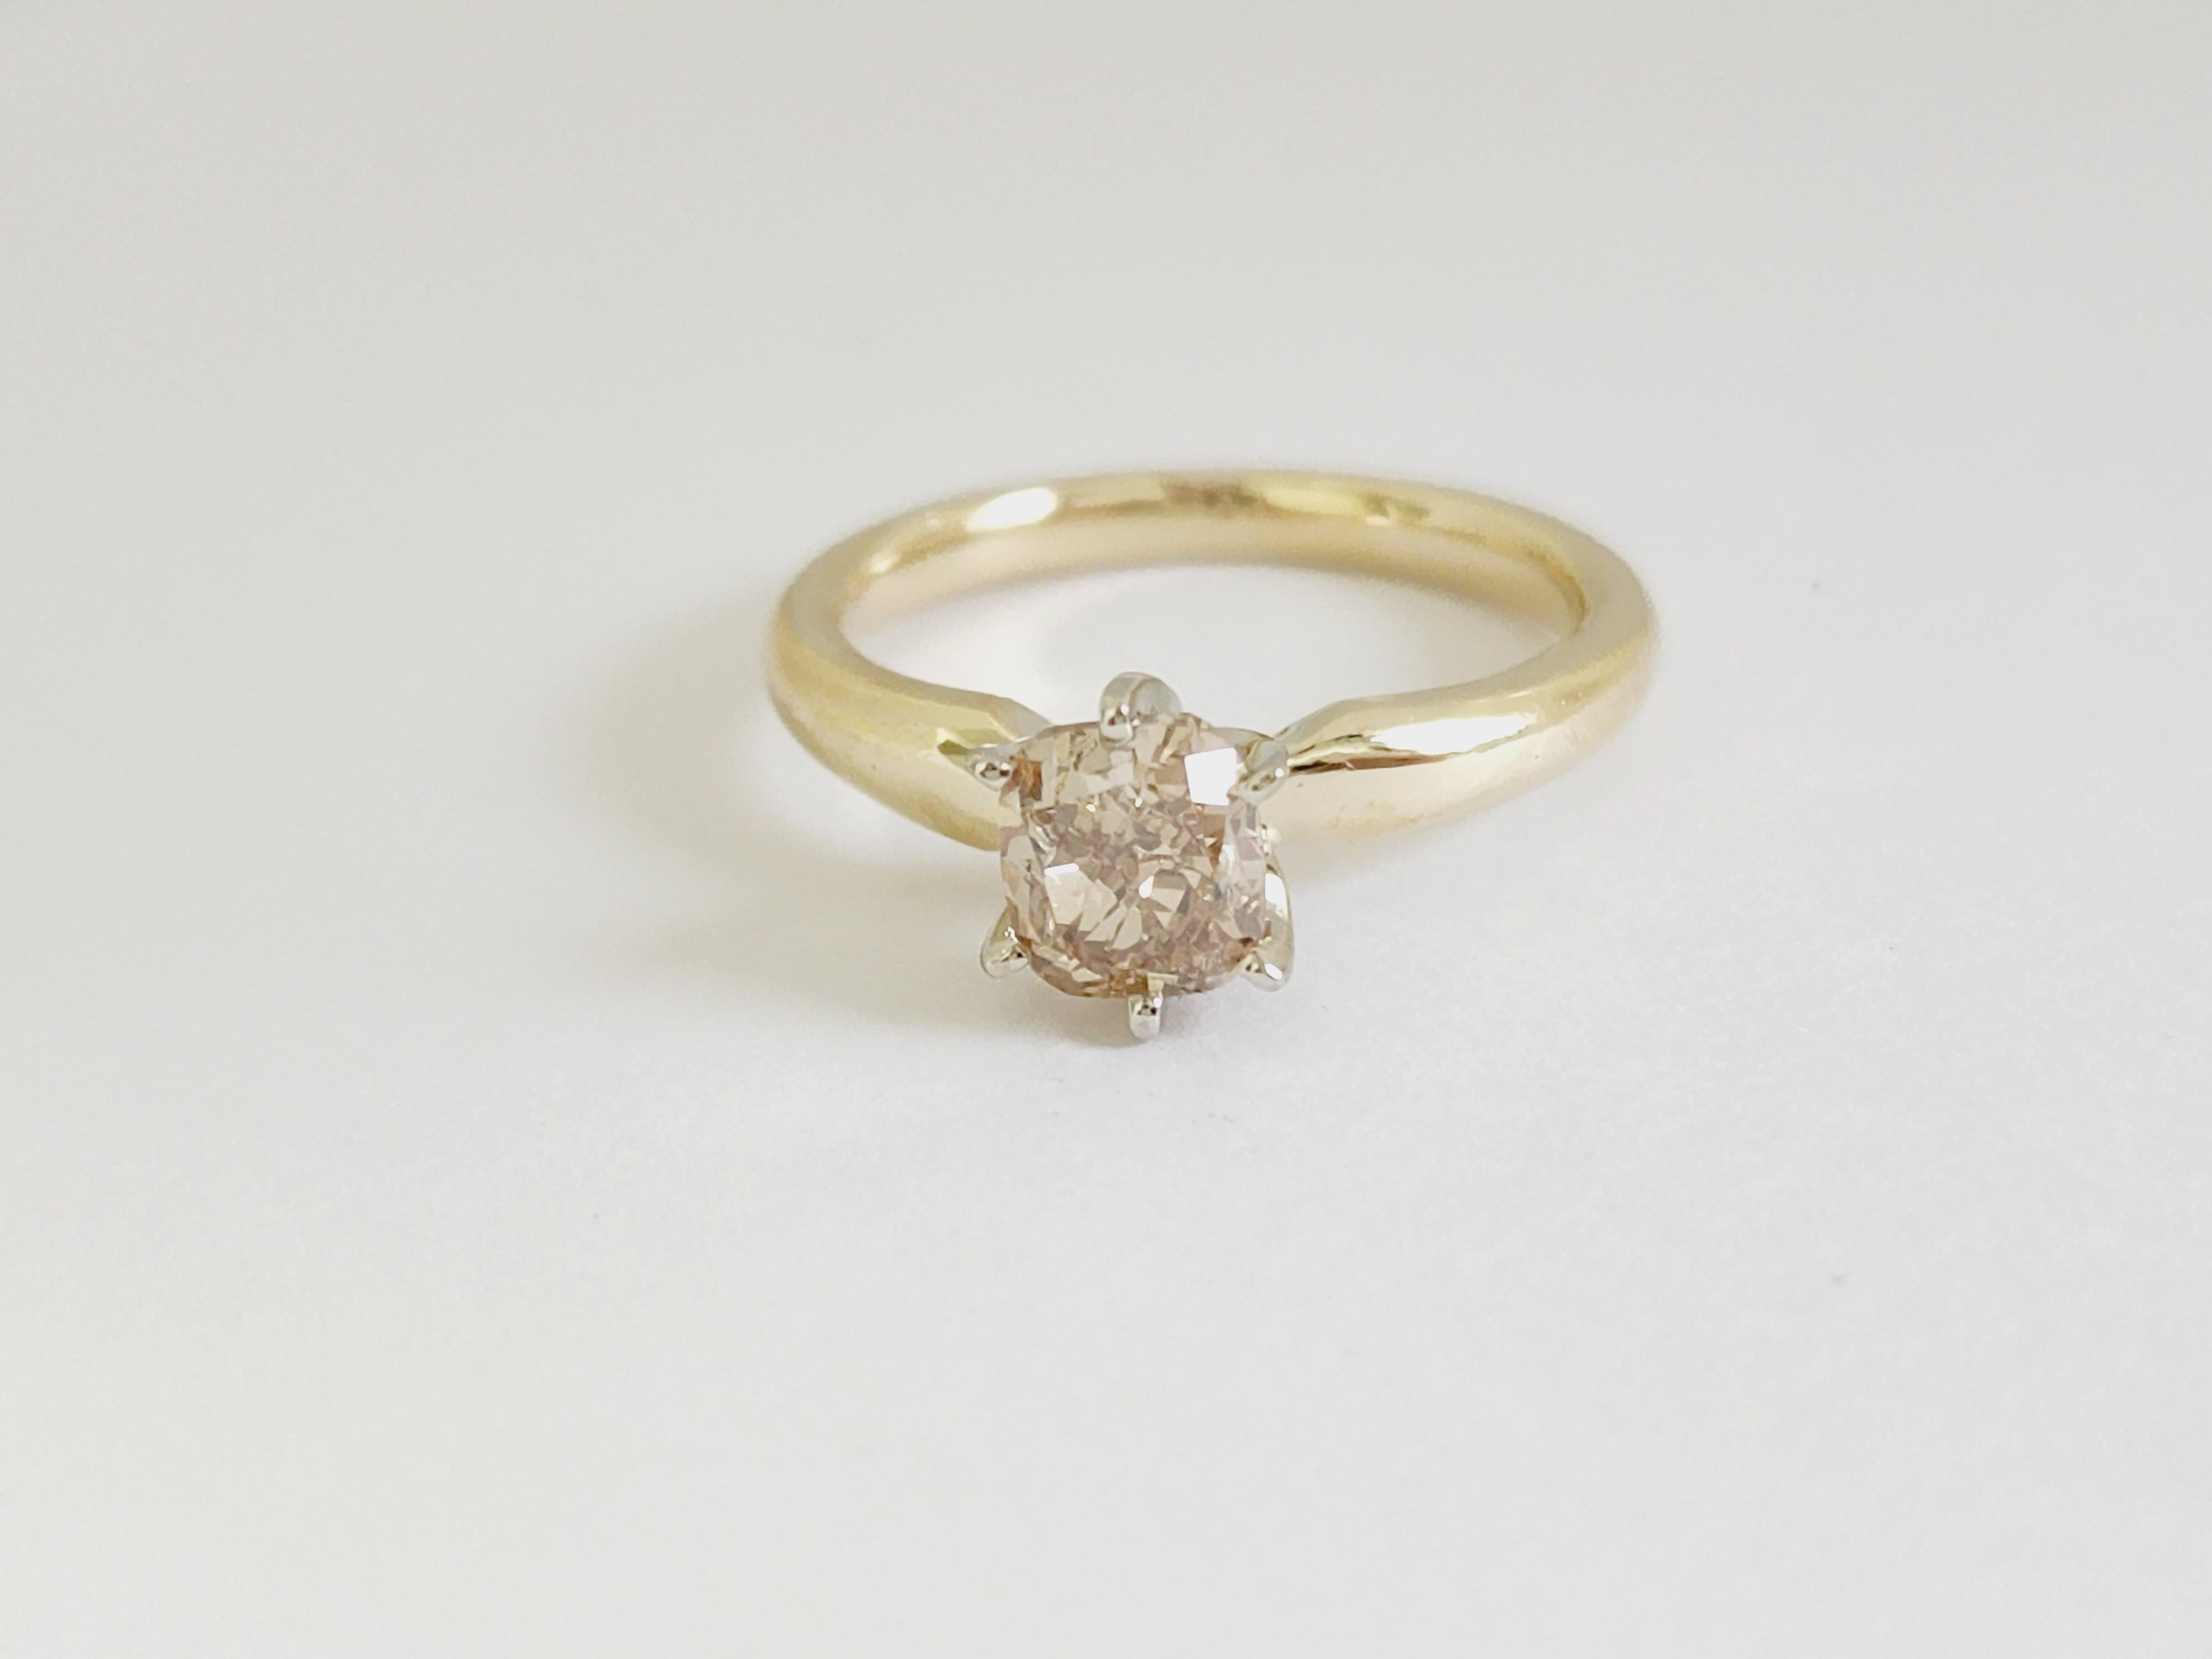 GIA 1.21 Carats cushion cut diamond set on a 6 prong Yellow gold 14 Karat solitaire Ring. 
Fancy Brown-Yellow, Clarity SI1
Ring Size 6.75